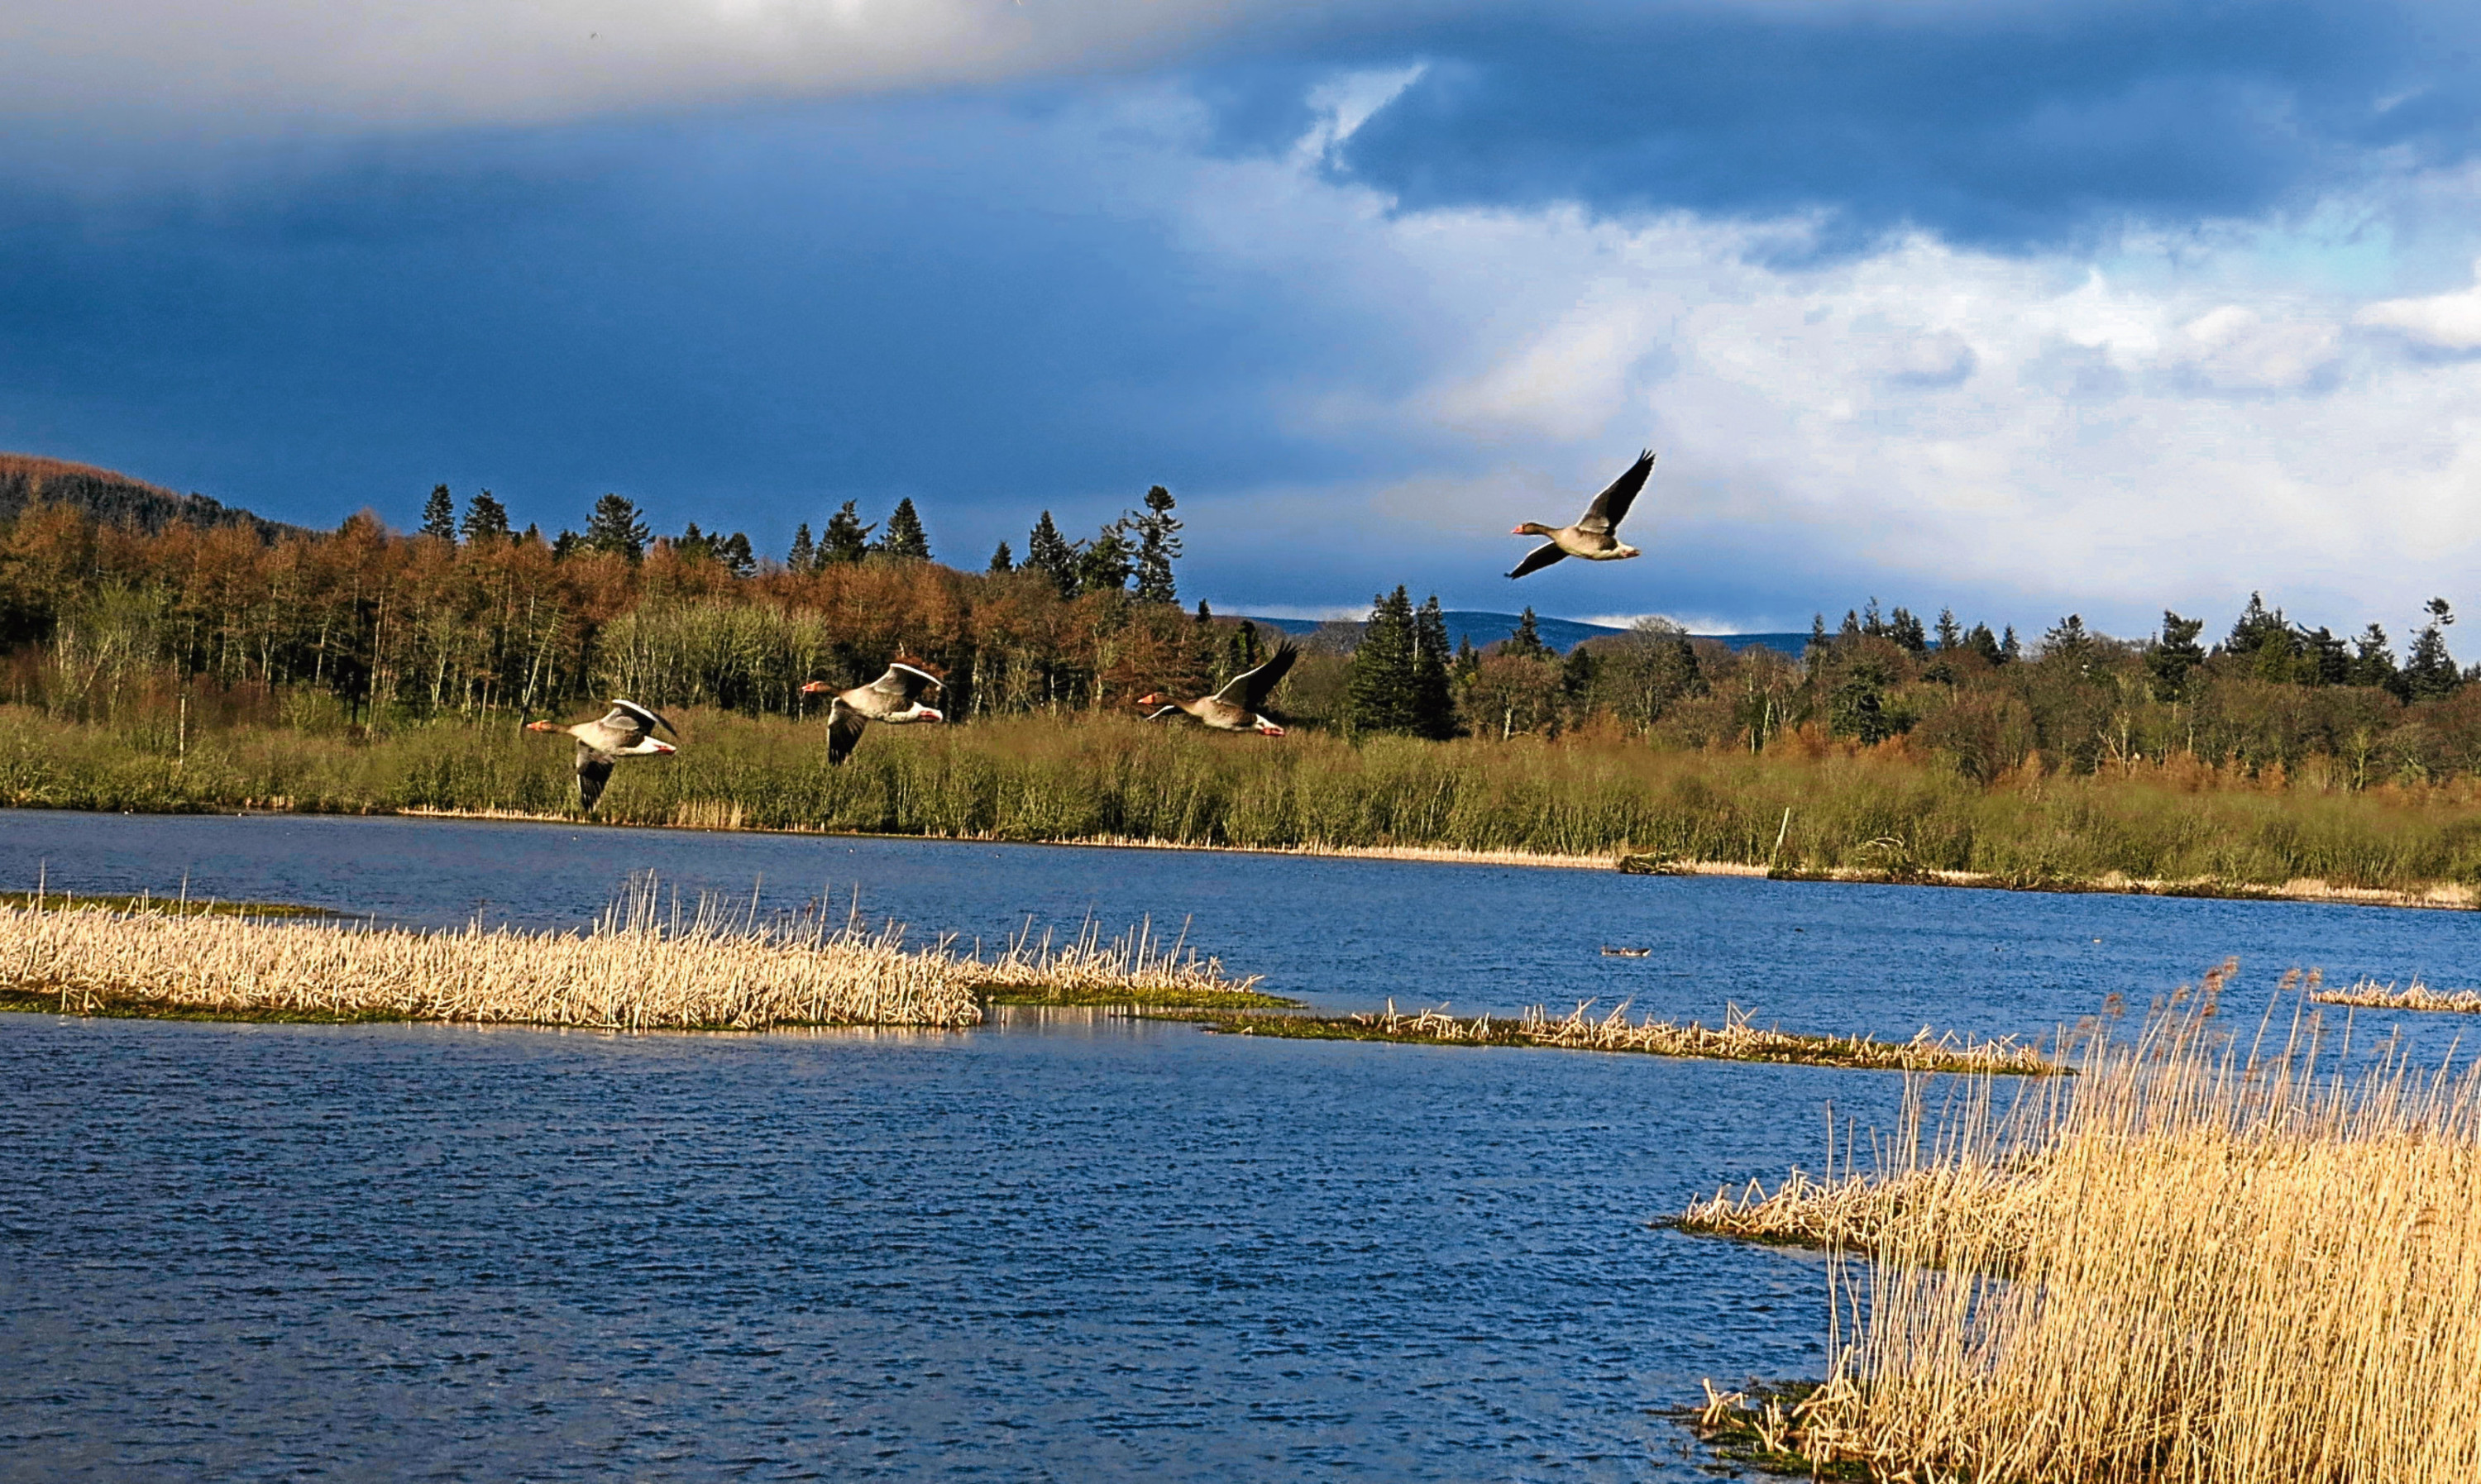 Geese in flight over the nature reserve at Loch of Kinnordy near Kirriemuir.